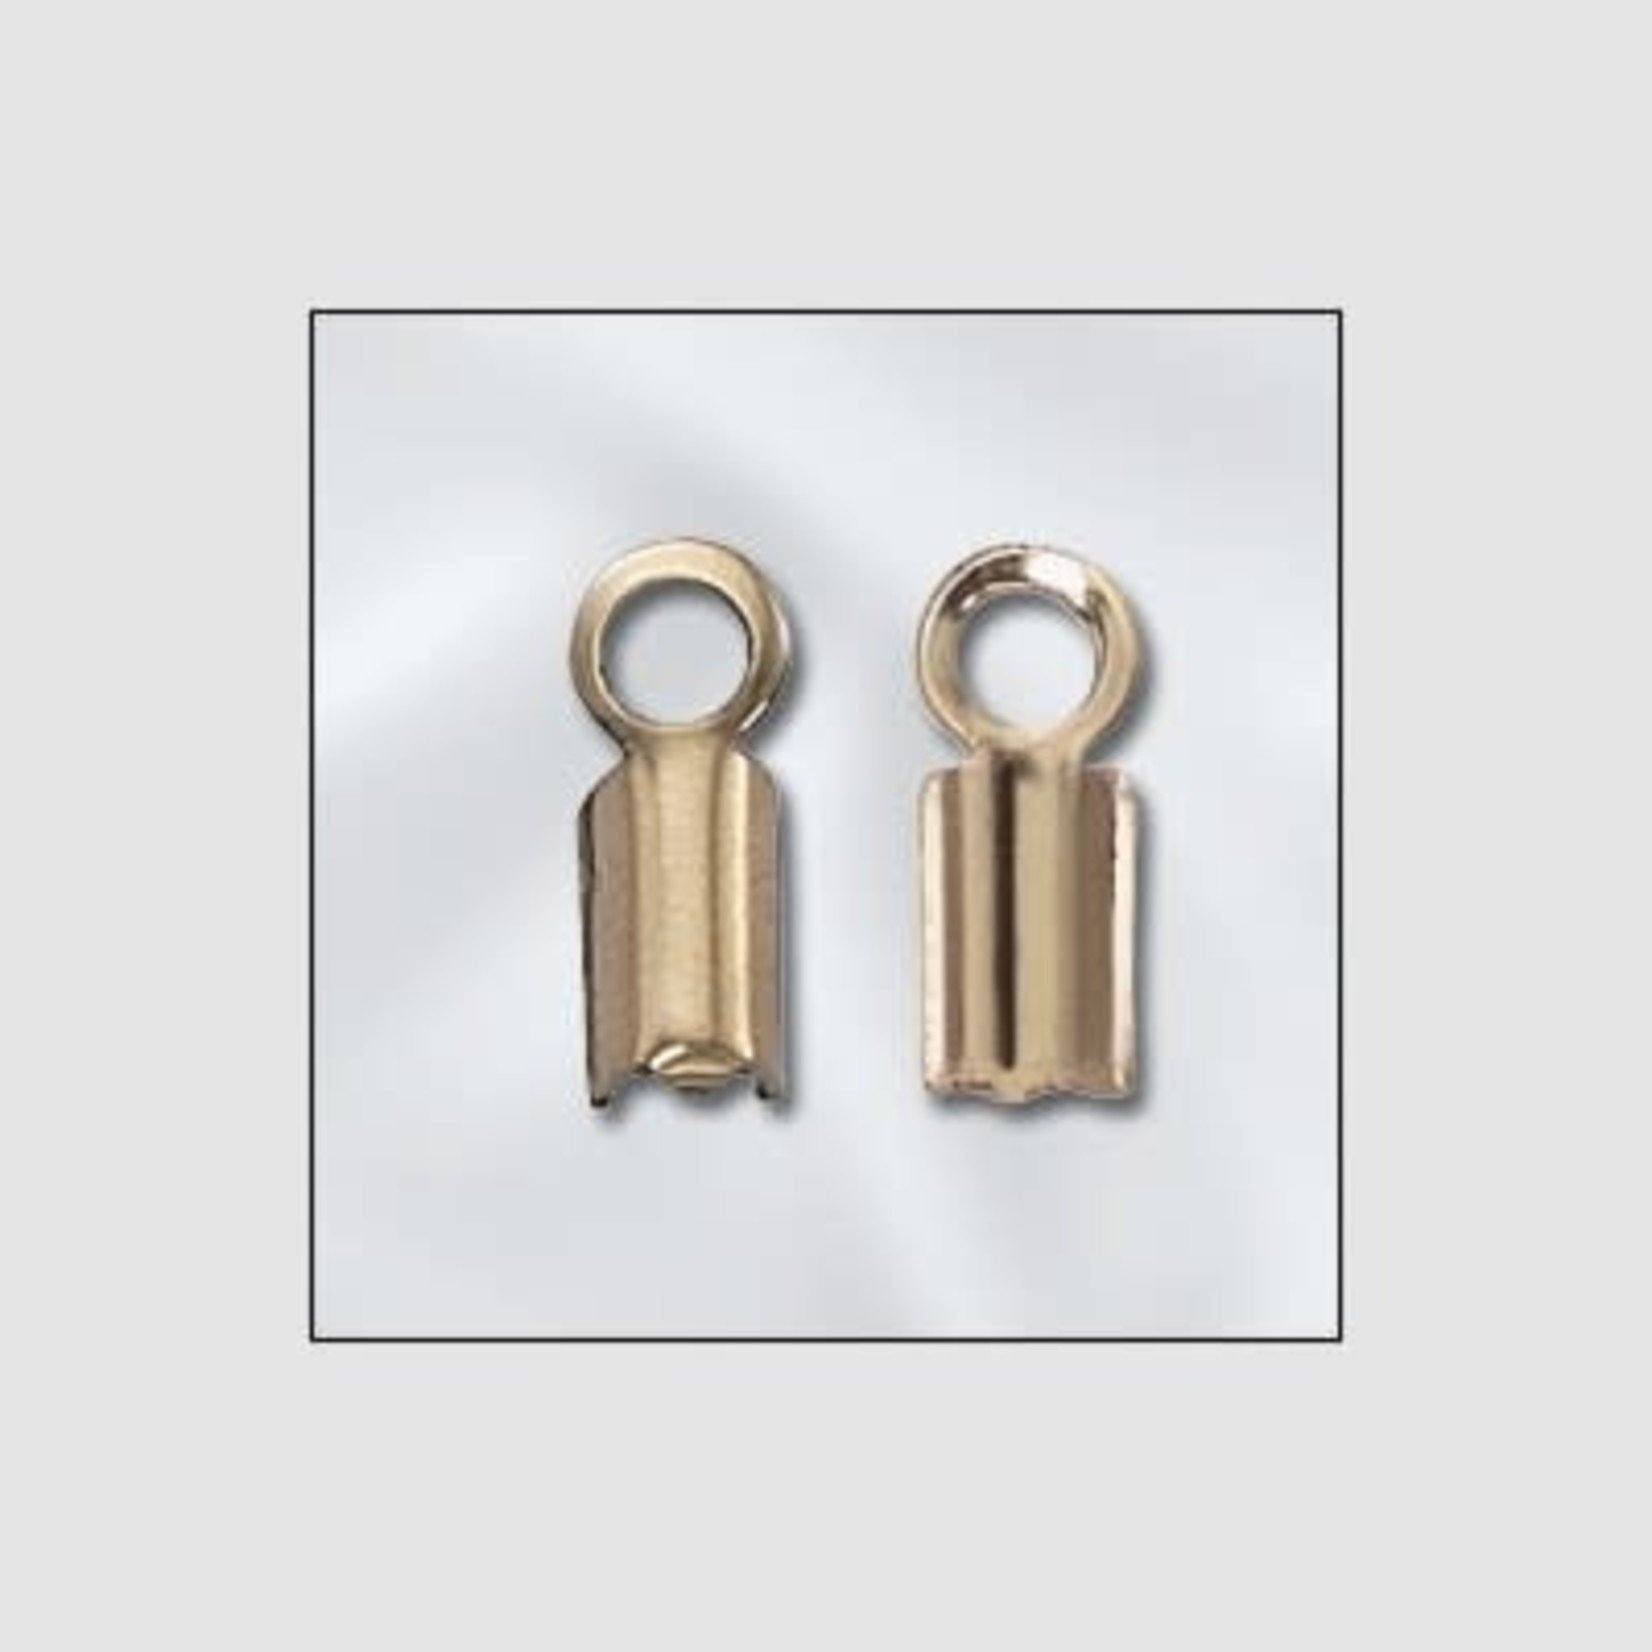 Gold Filled End Cord Fastener - Pair